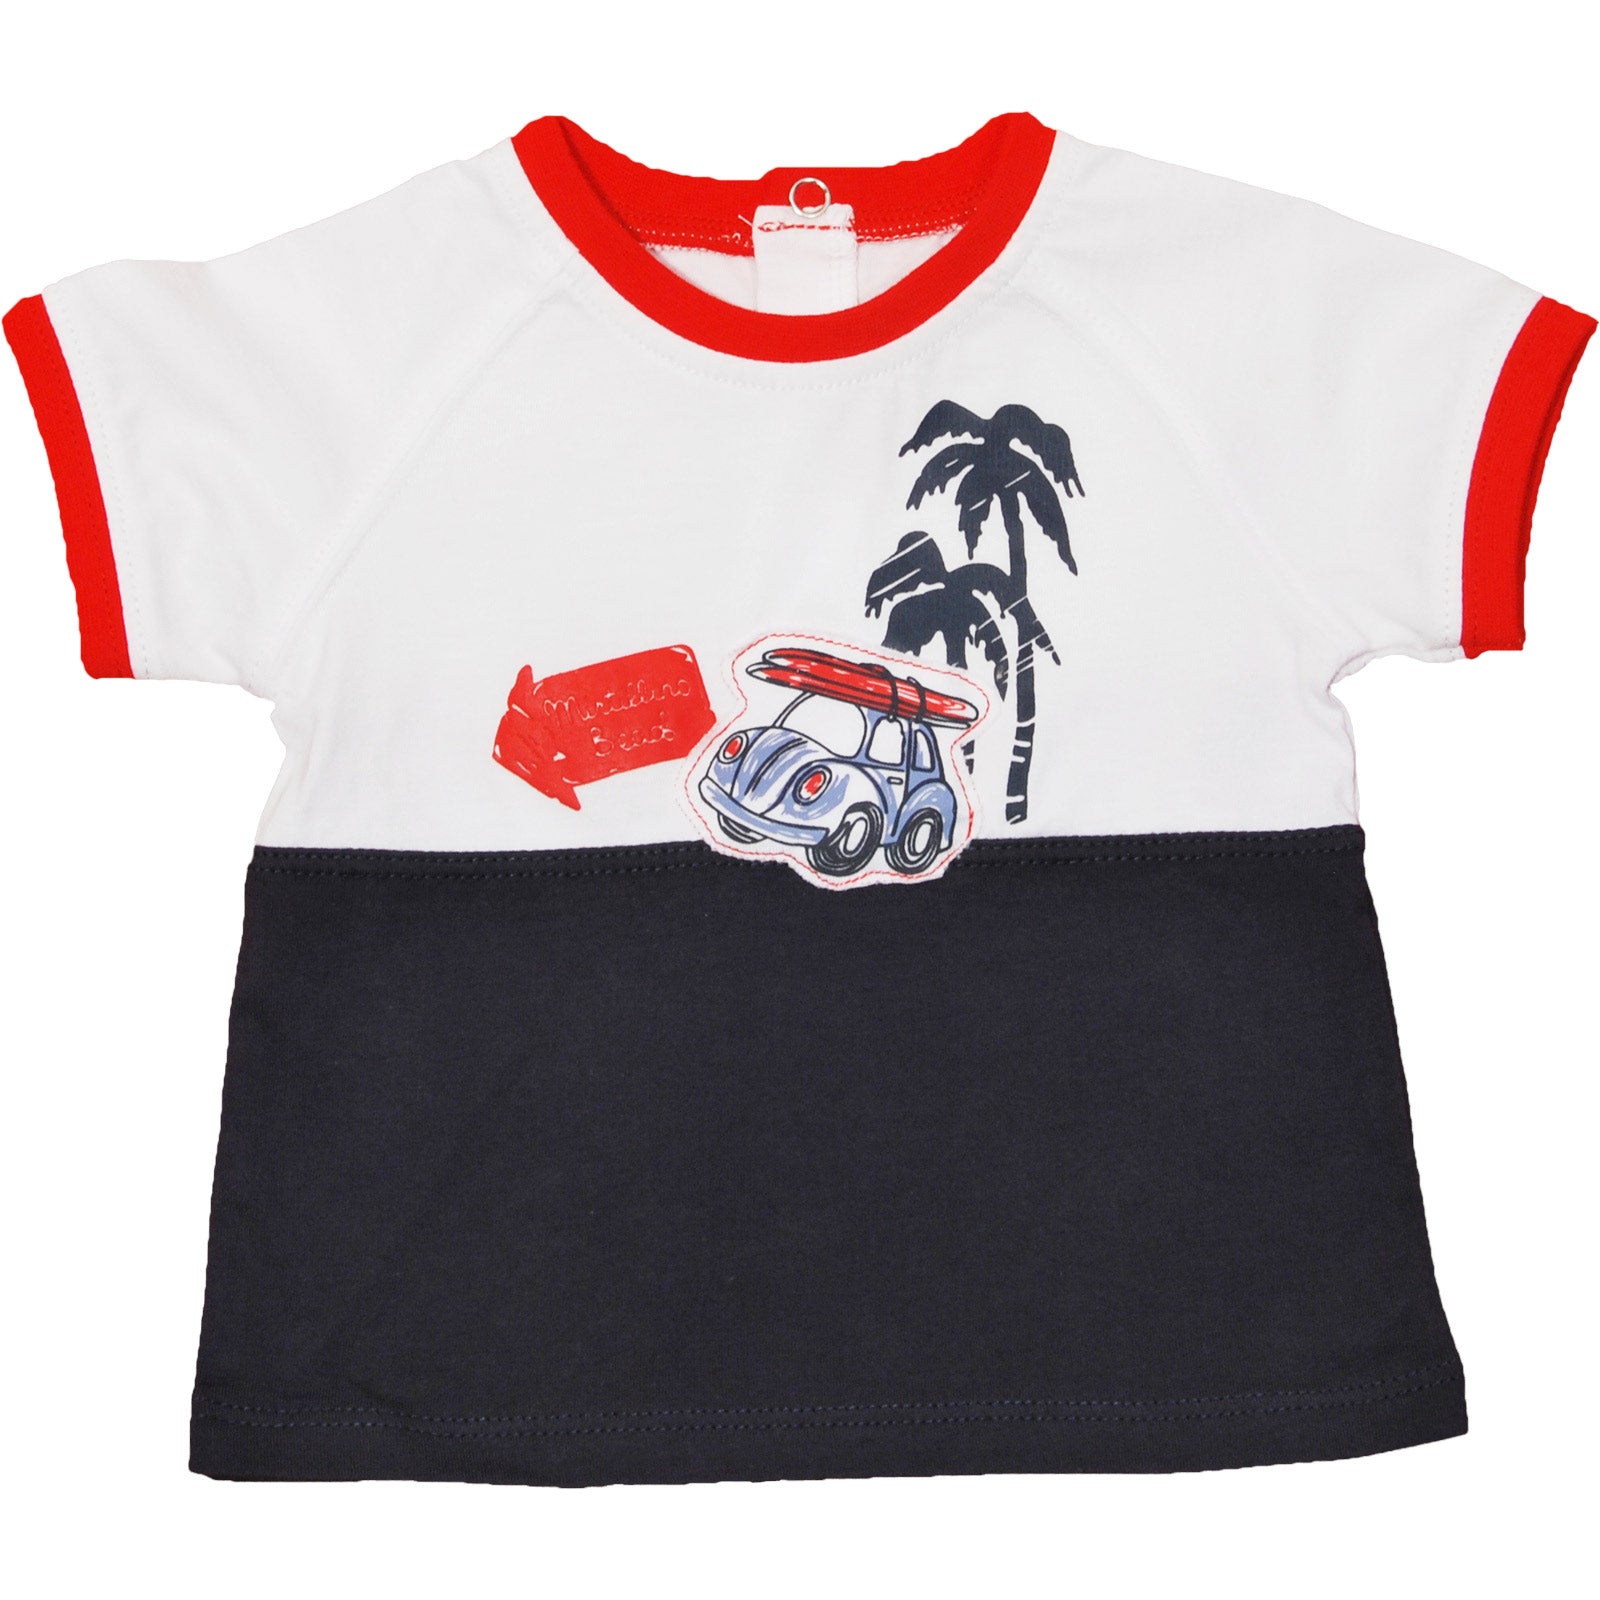 
  Short-sleeved cotton jersey T-shirt from the children's clothing line Mirtillo, back buttoning...